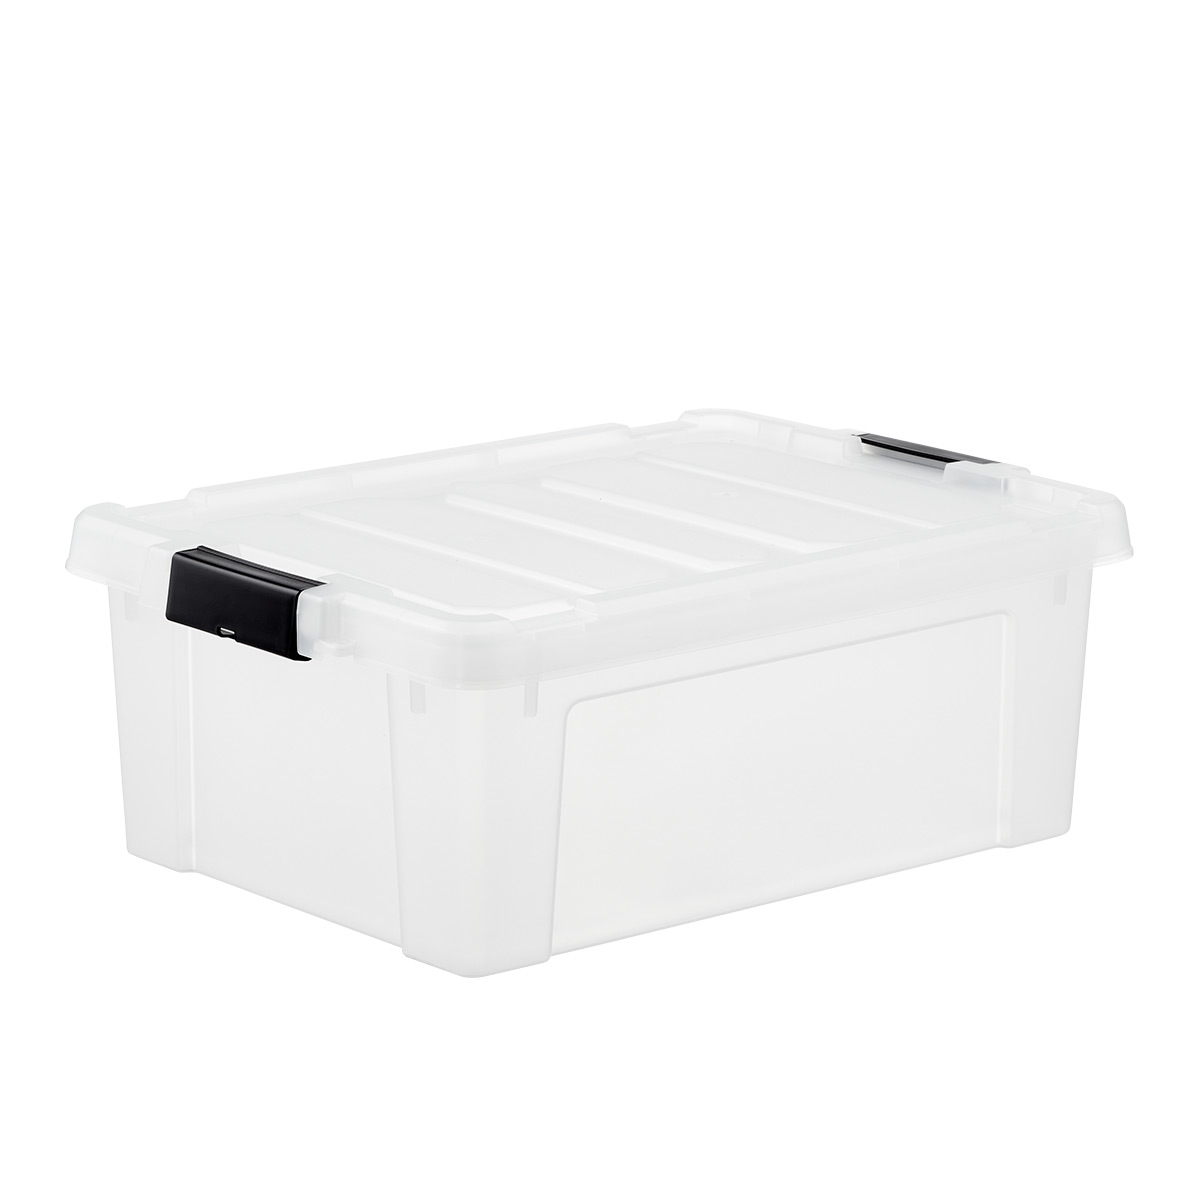 https://www.containerstore.com/catalogimages/444747/10088629_The_Container_Store_11.75_G.jpg